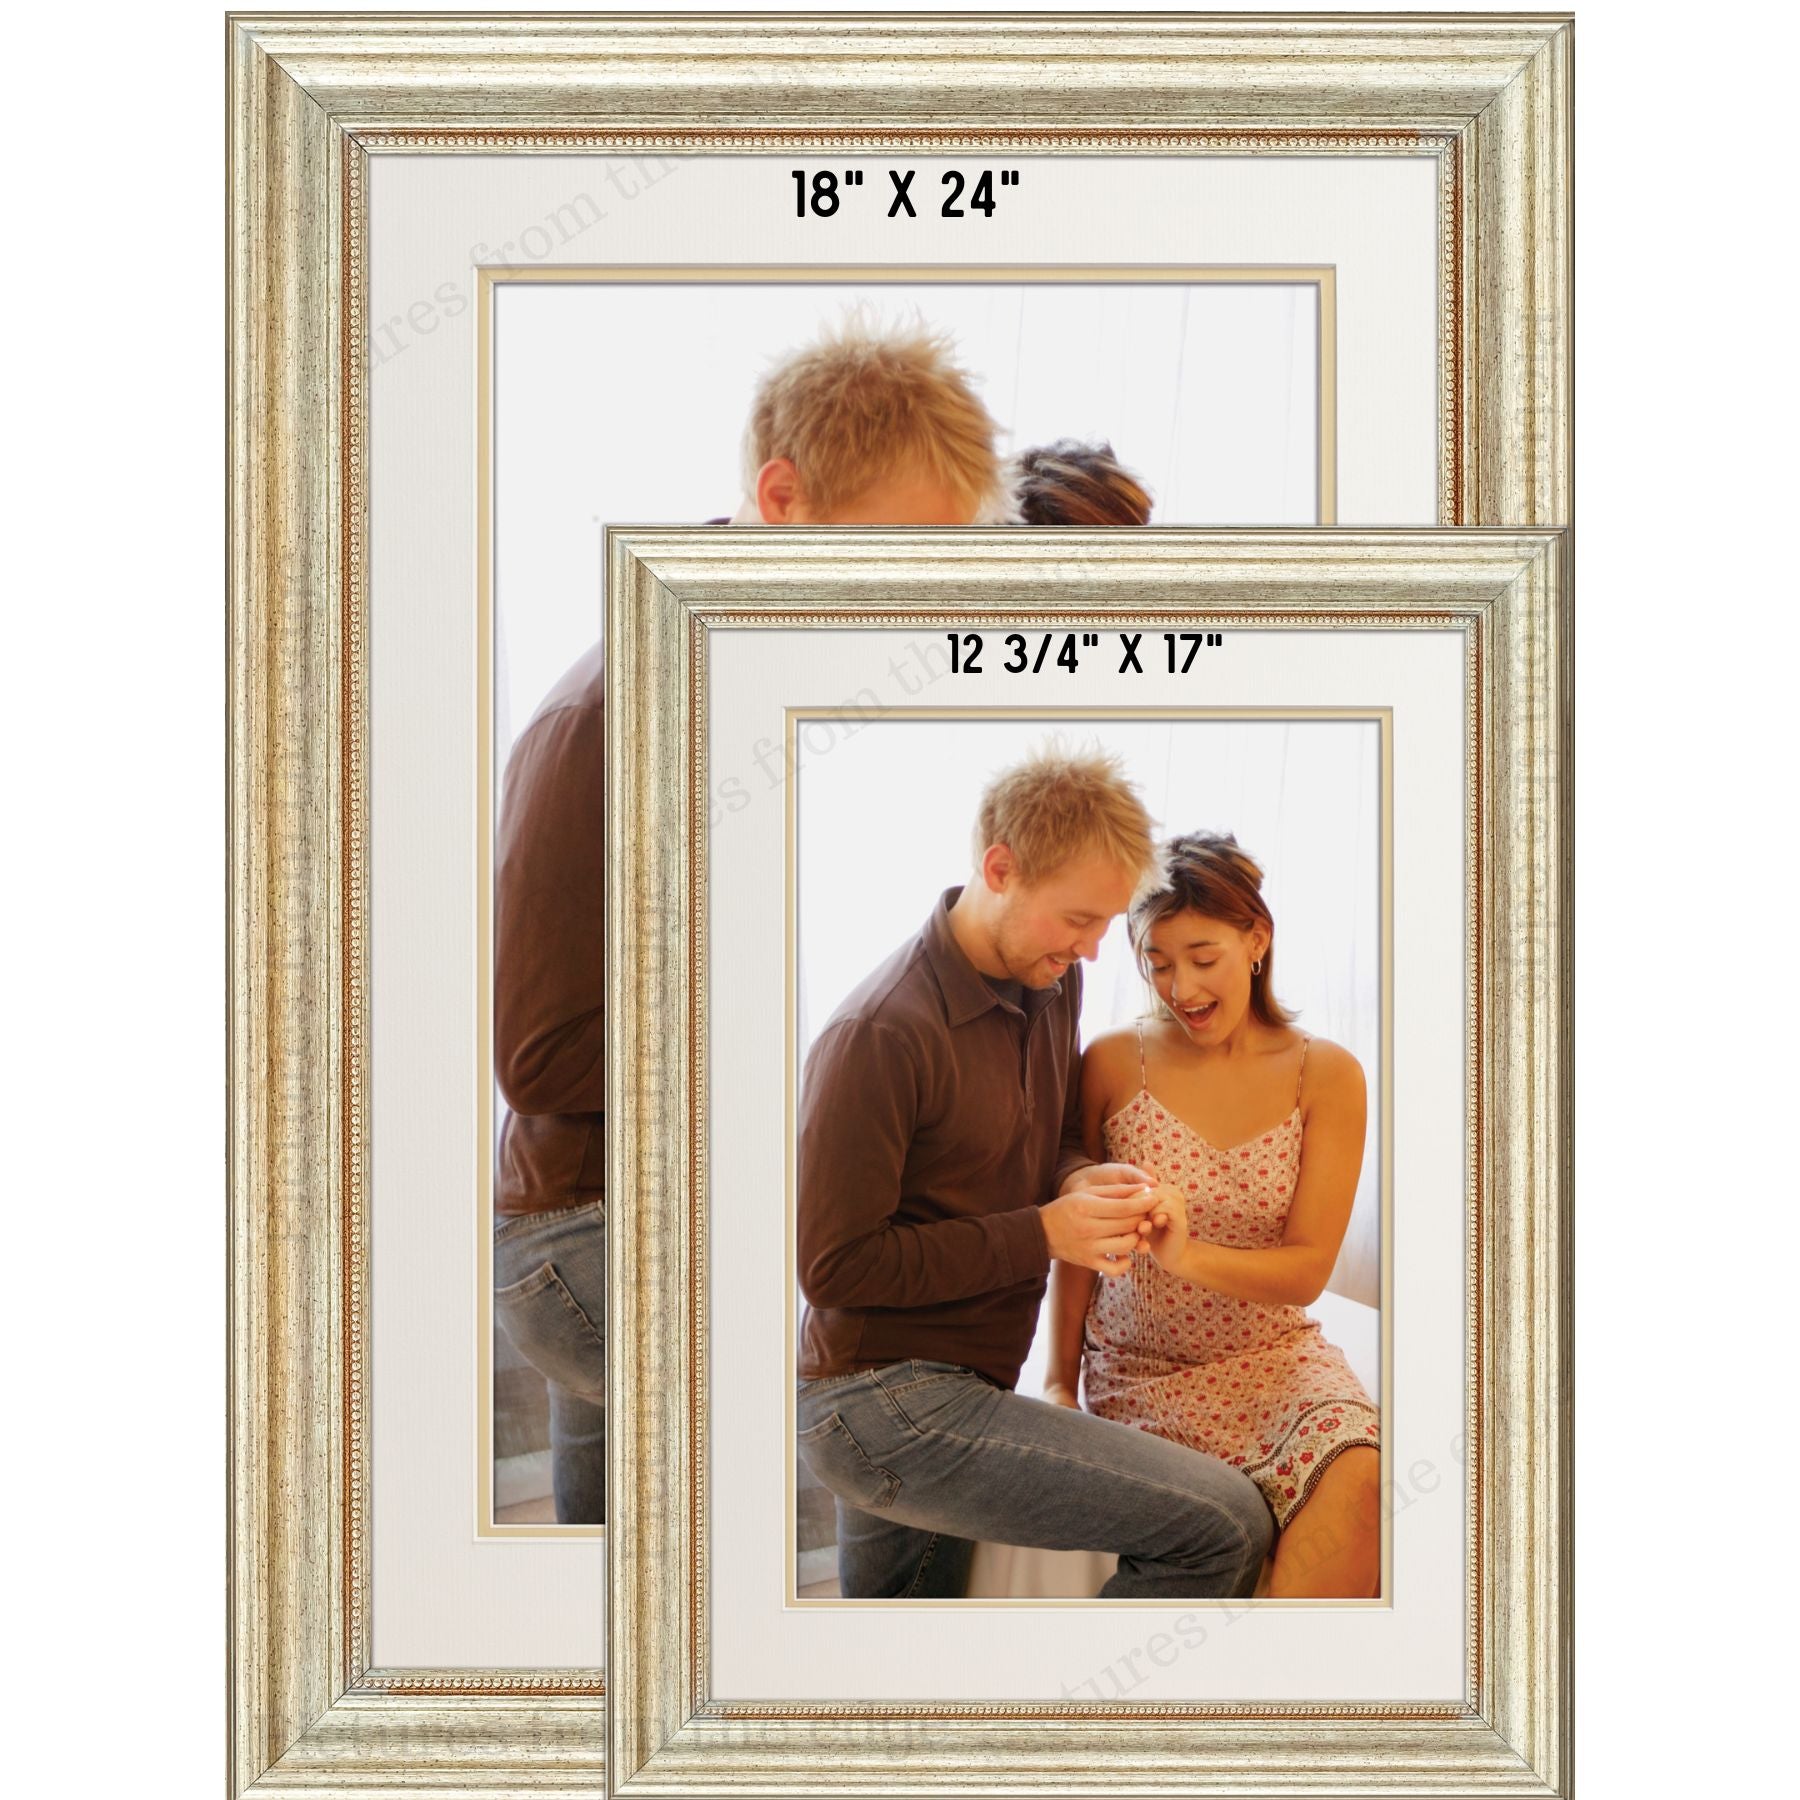 Custom Poster Bronze Frame. Moveable and removeable. Celebrate memories!